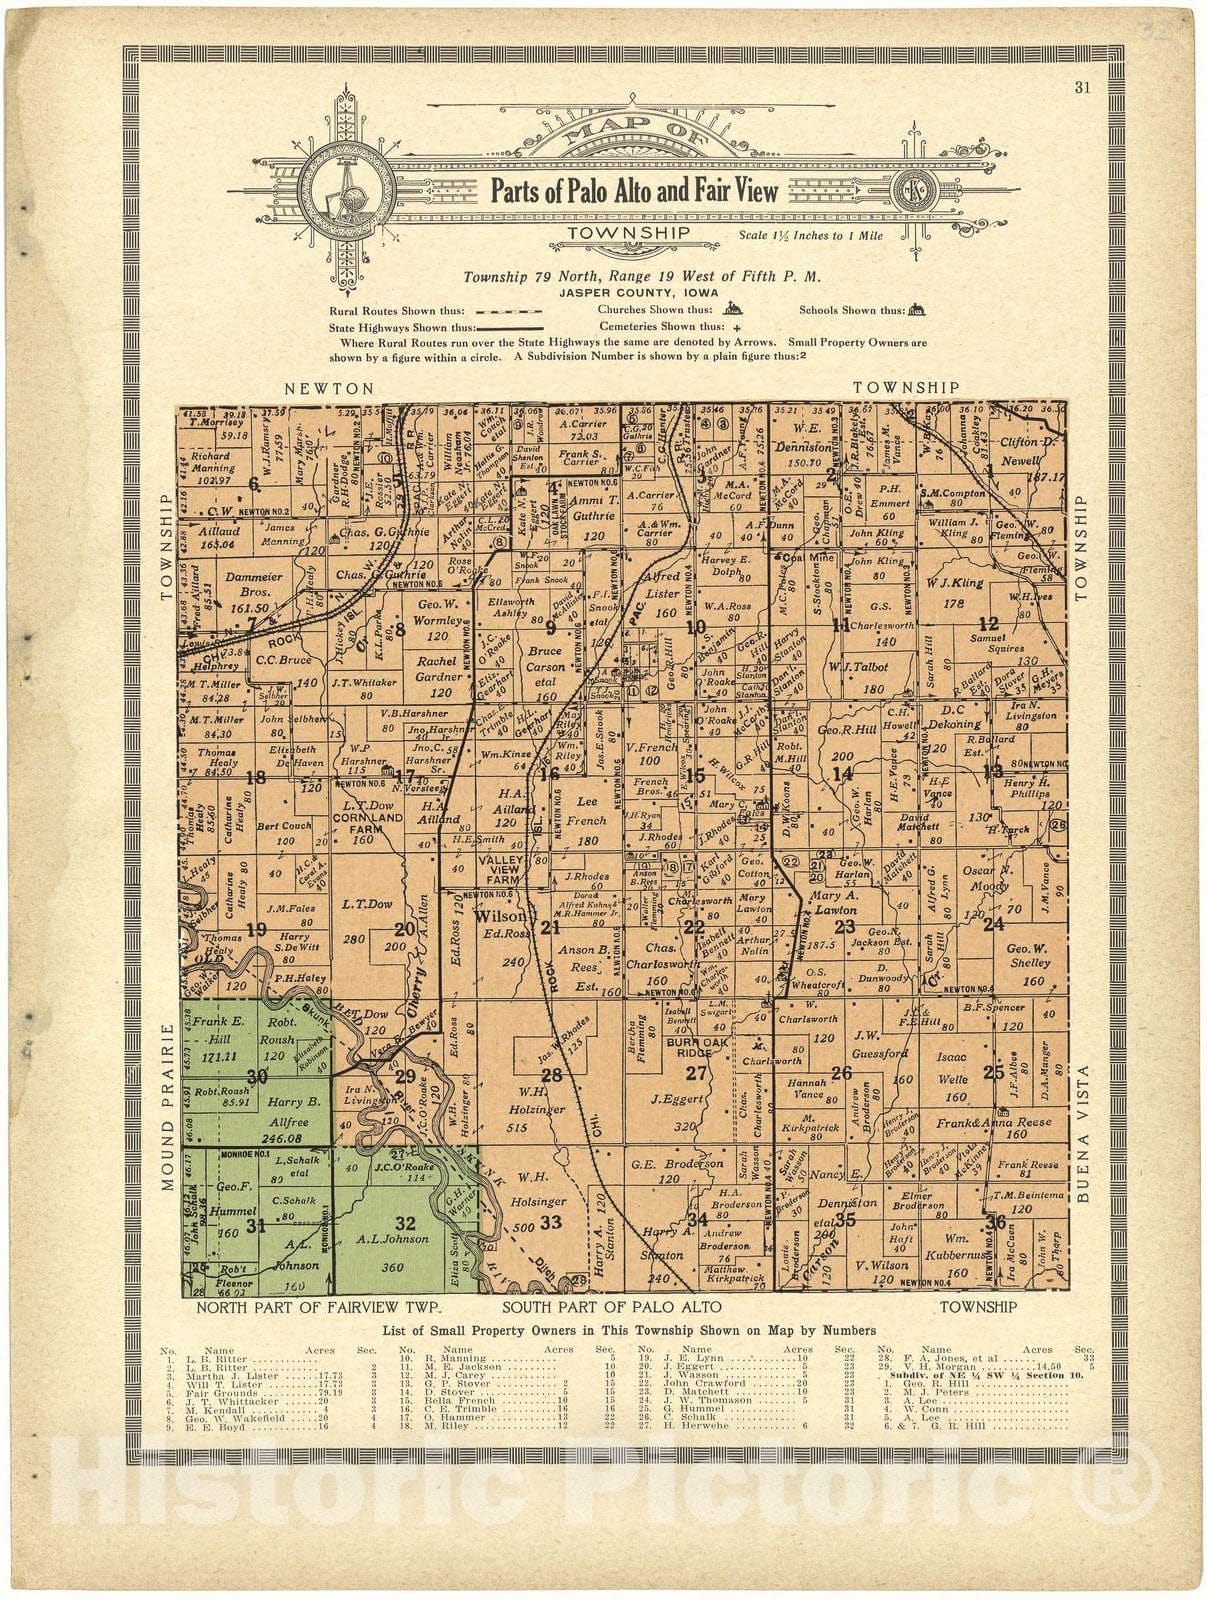 Historic 1914 Map - Atlas and plat Book of Jasper County, Iowa - Map of Parts of Palo Alto and Fair View Township - Standard Atlas and Directory of Jasper County, Iowa